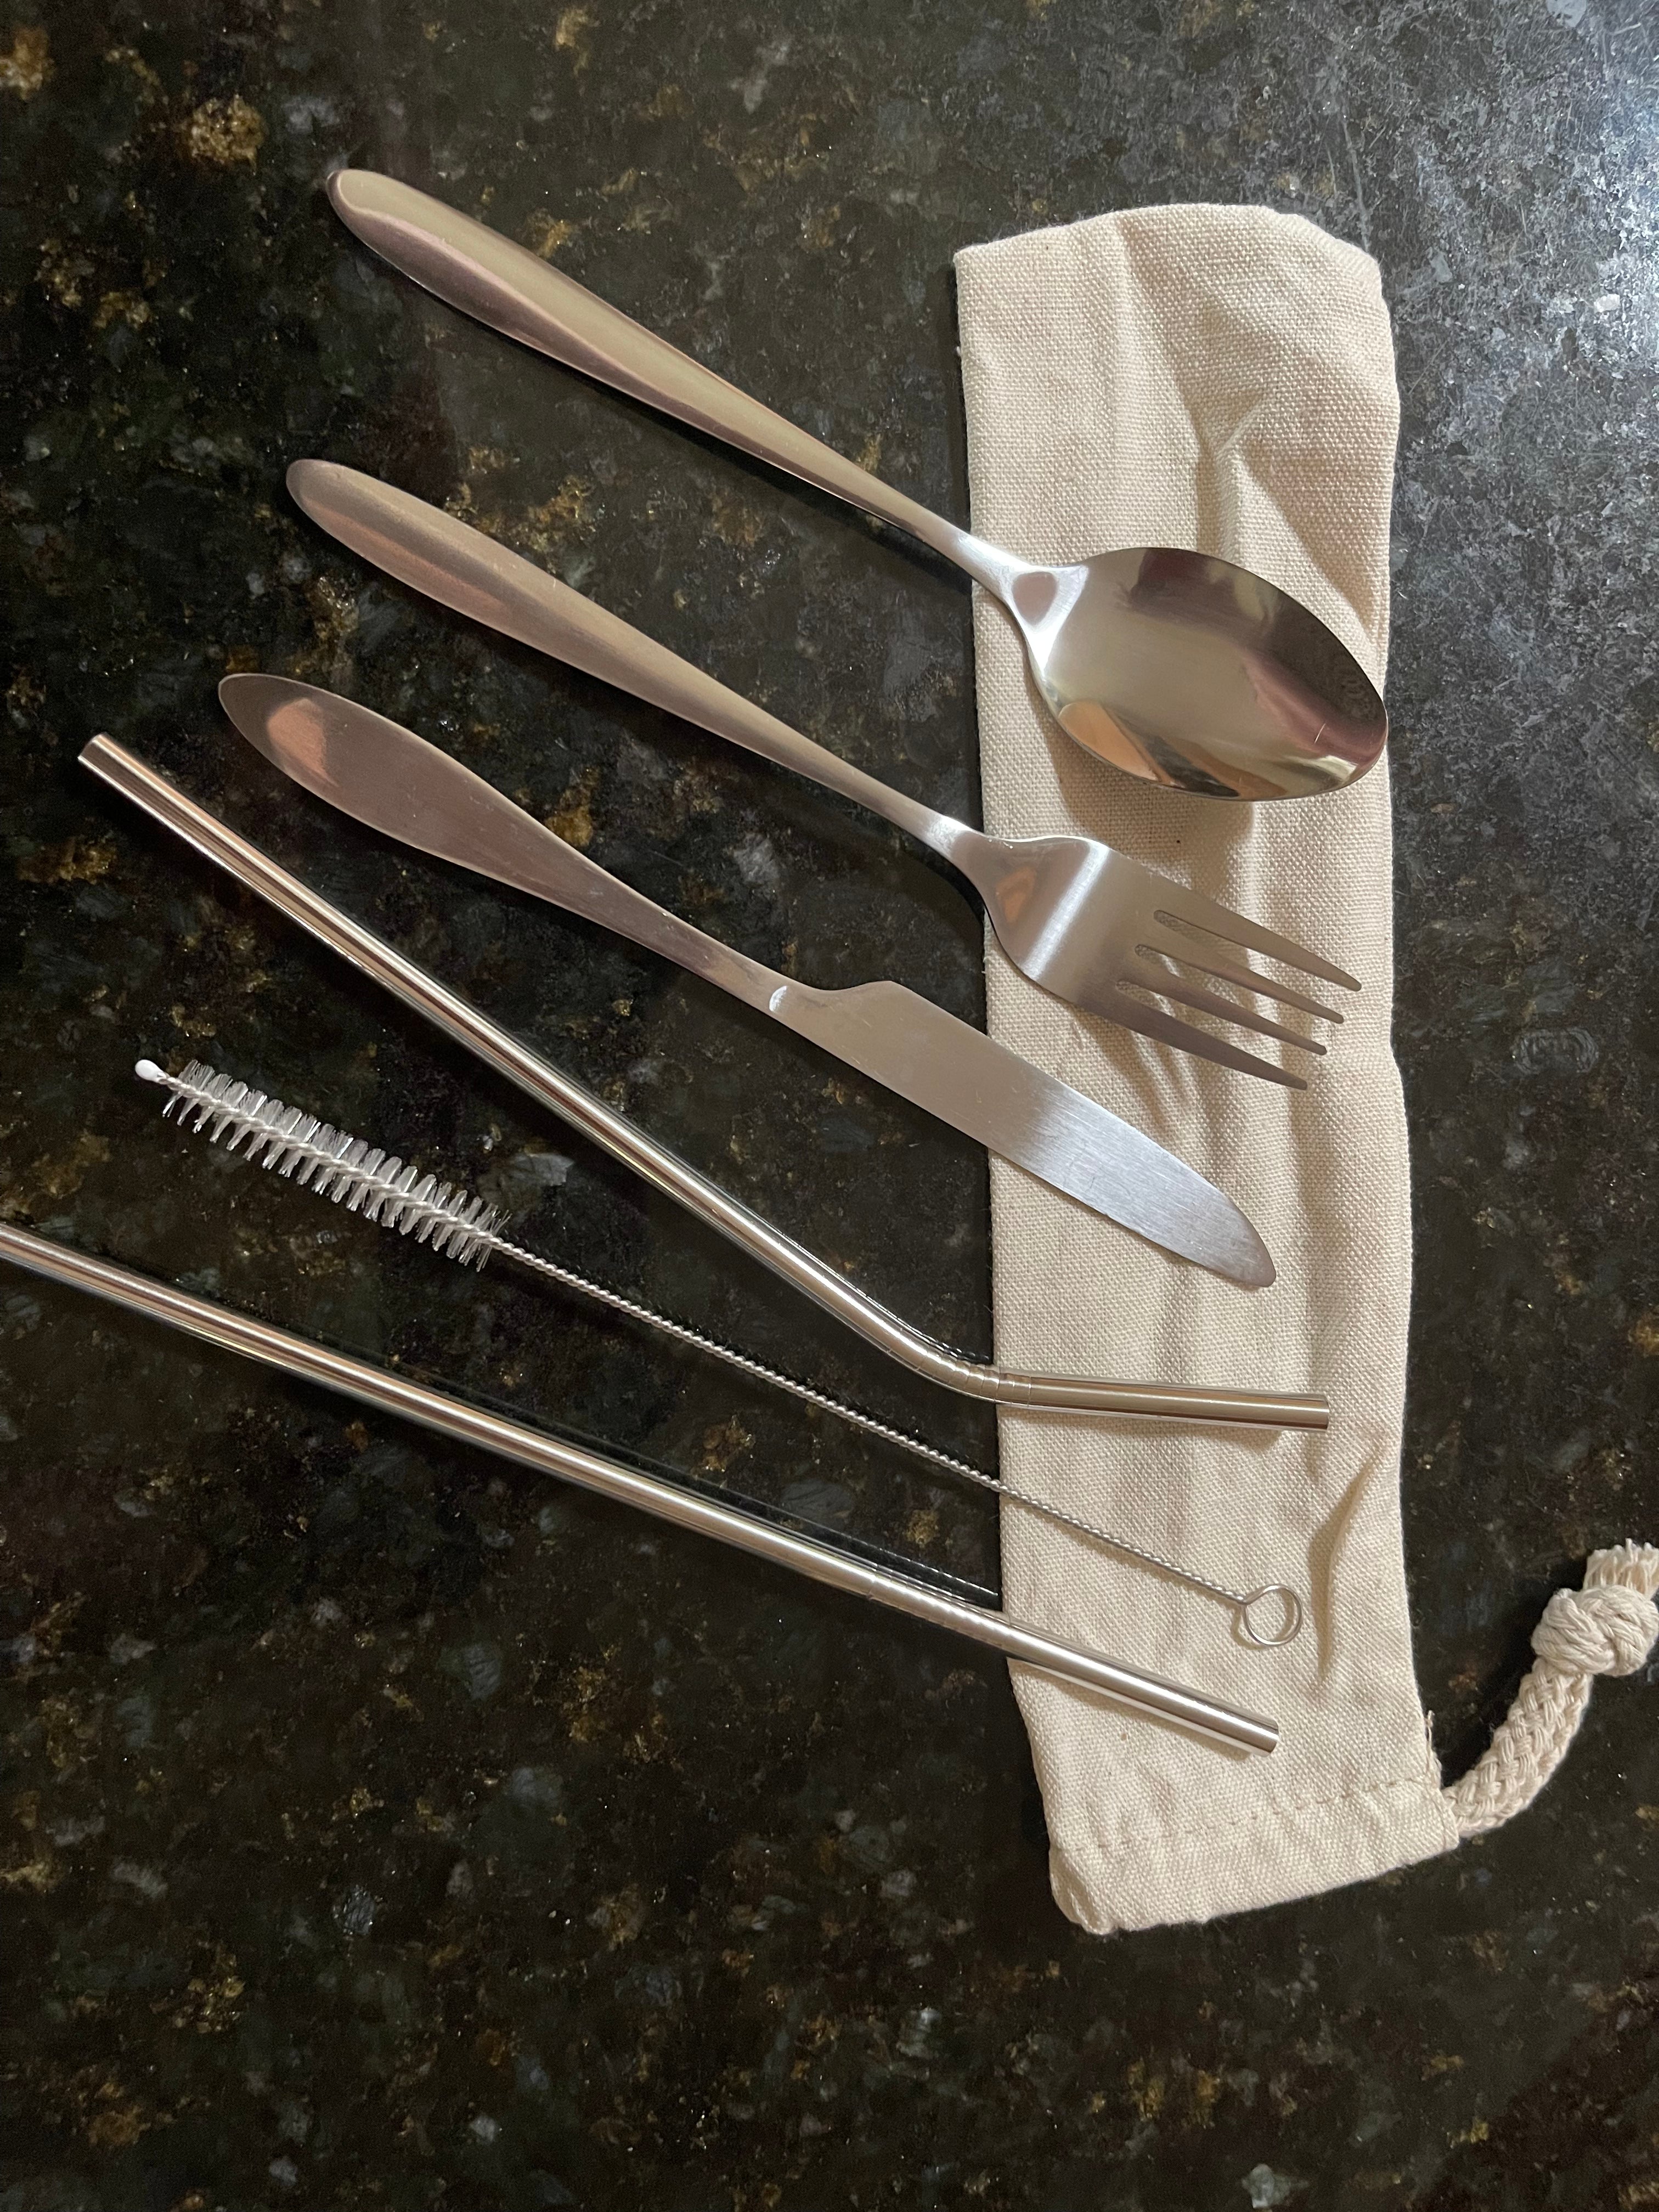 Stainless Steel Travel Cutlery set with Straws and Calico Pouch